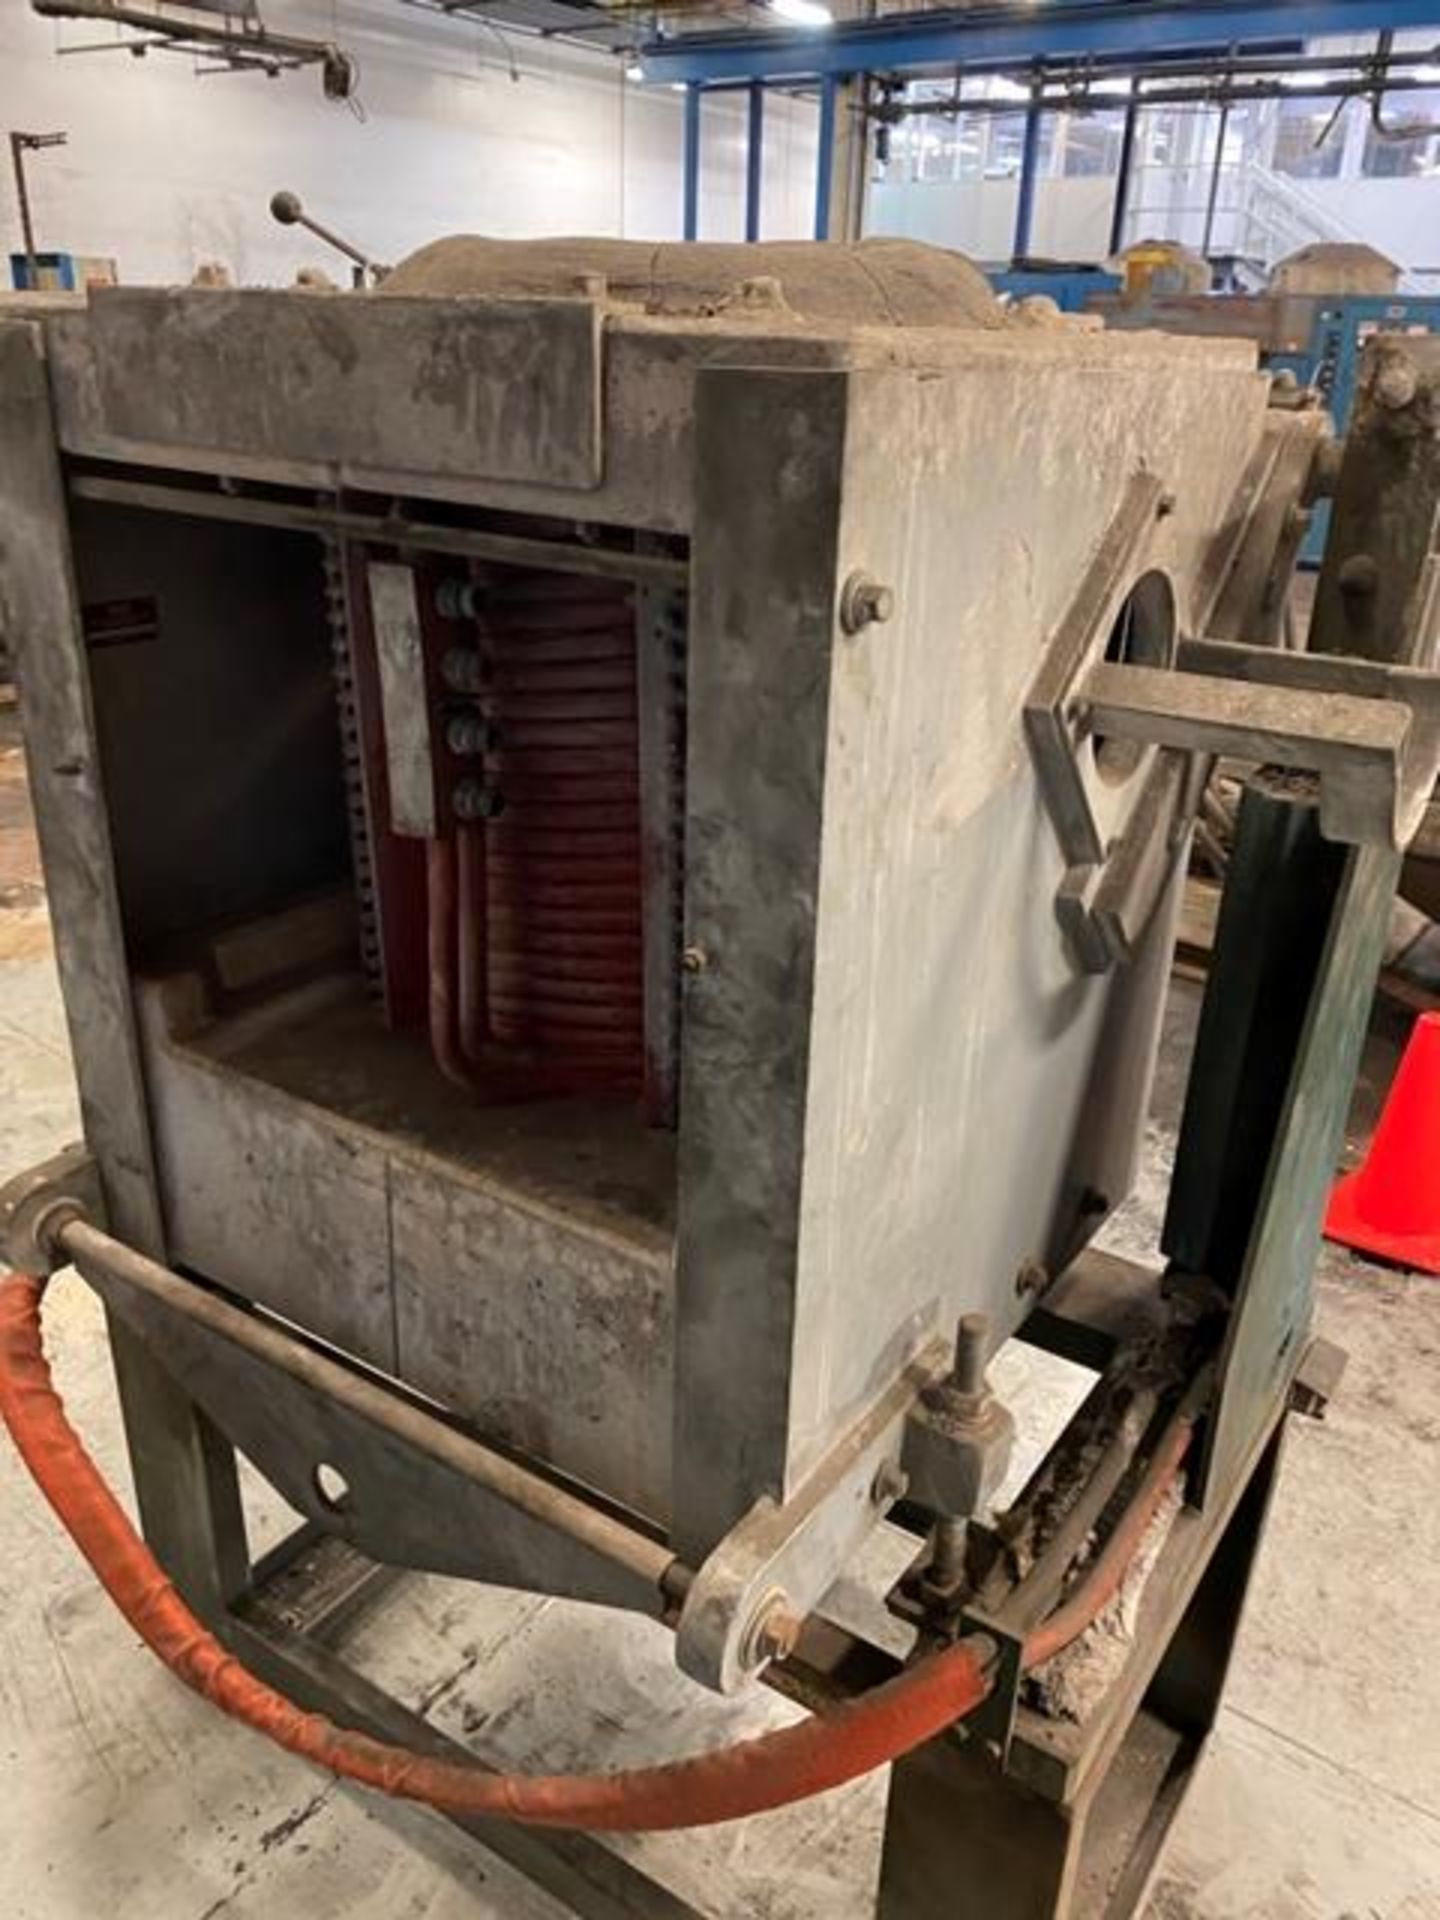 ITC Induction Furnace Rigging Price $175 - Image 3 of 4